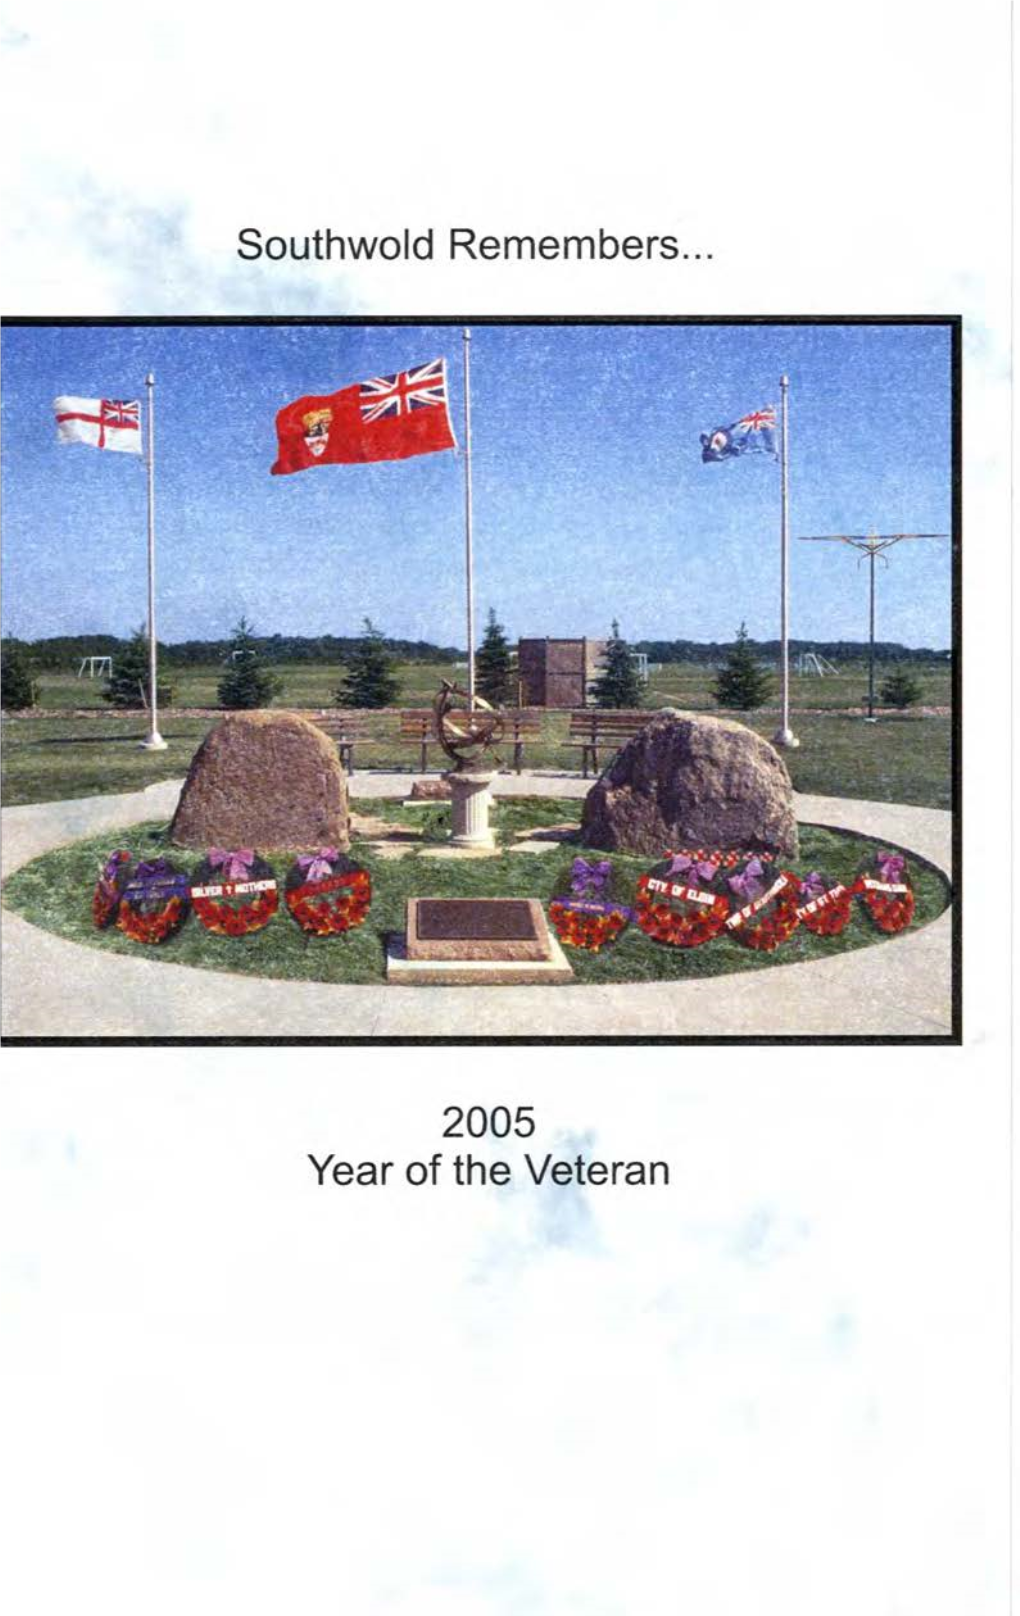 Southwold Remembers ... 2005 Year of the Veteran